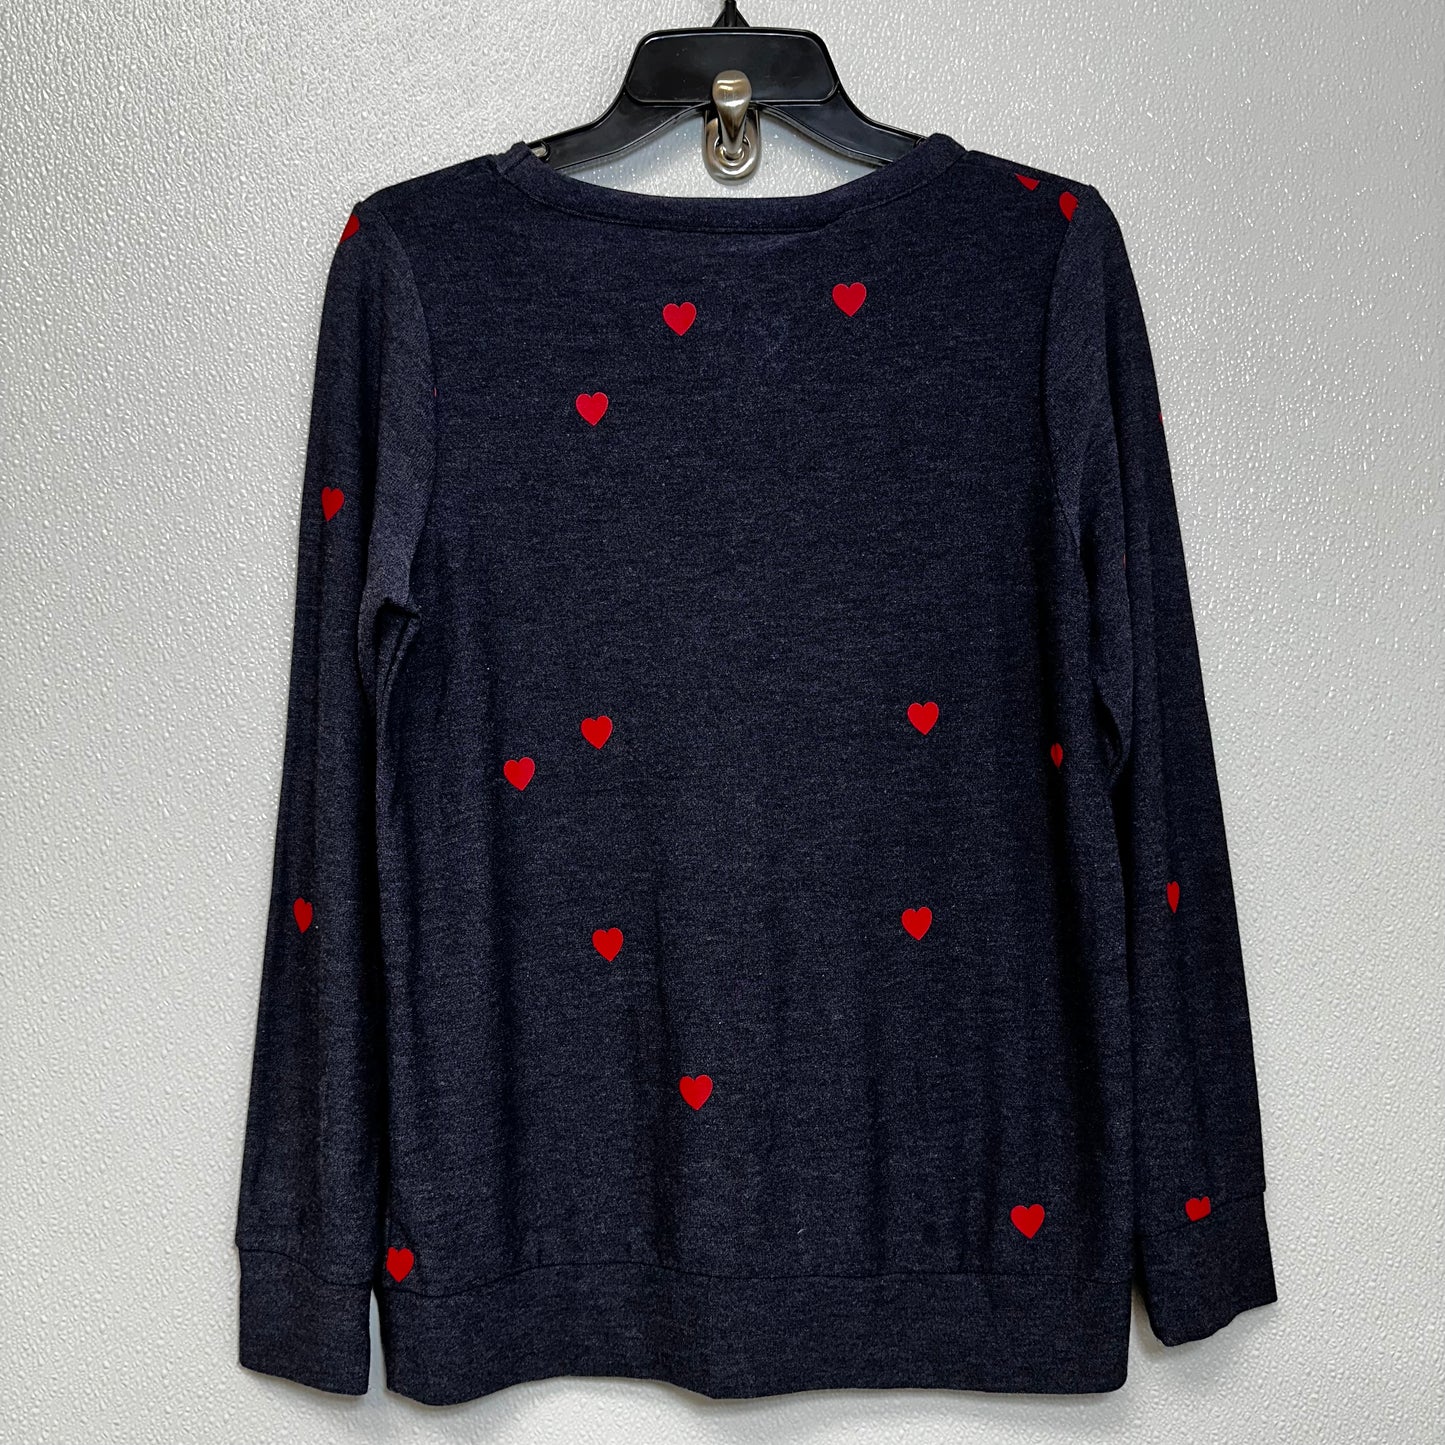 Valentine Top Long Sleeve Clothes Mentor, Size M